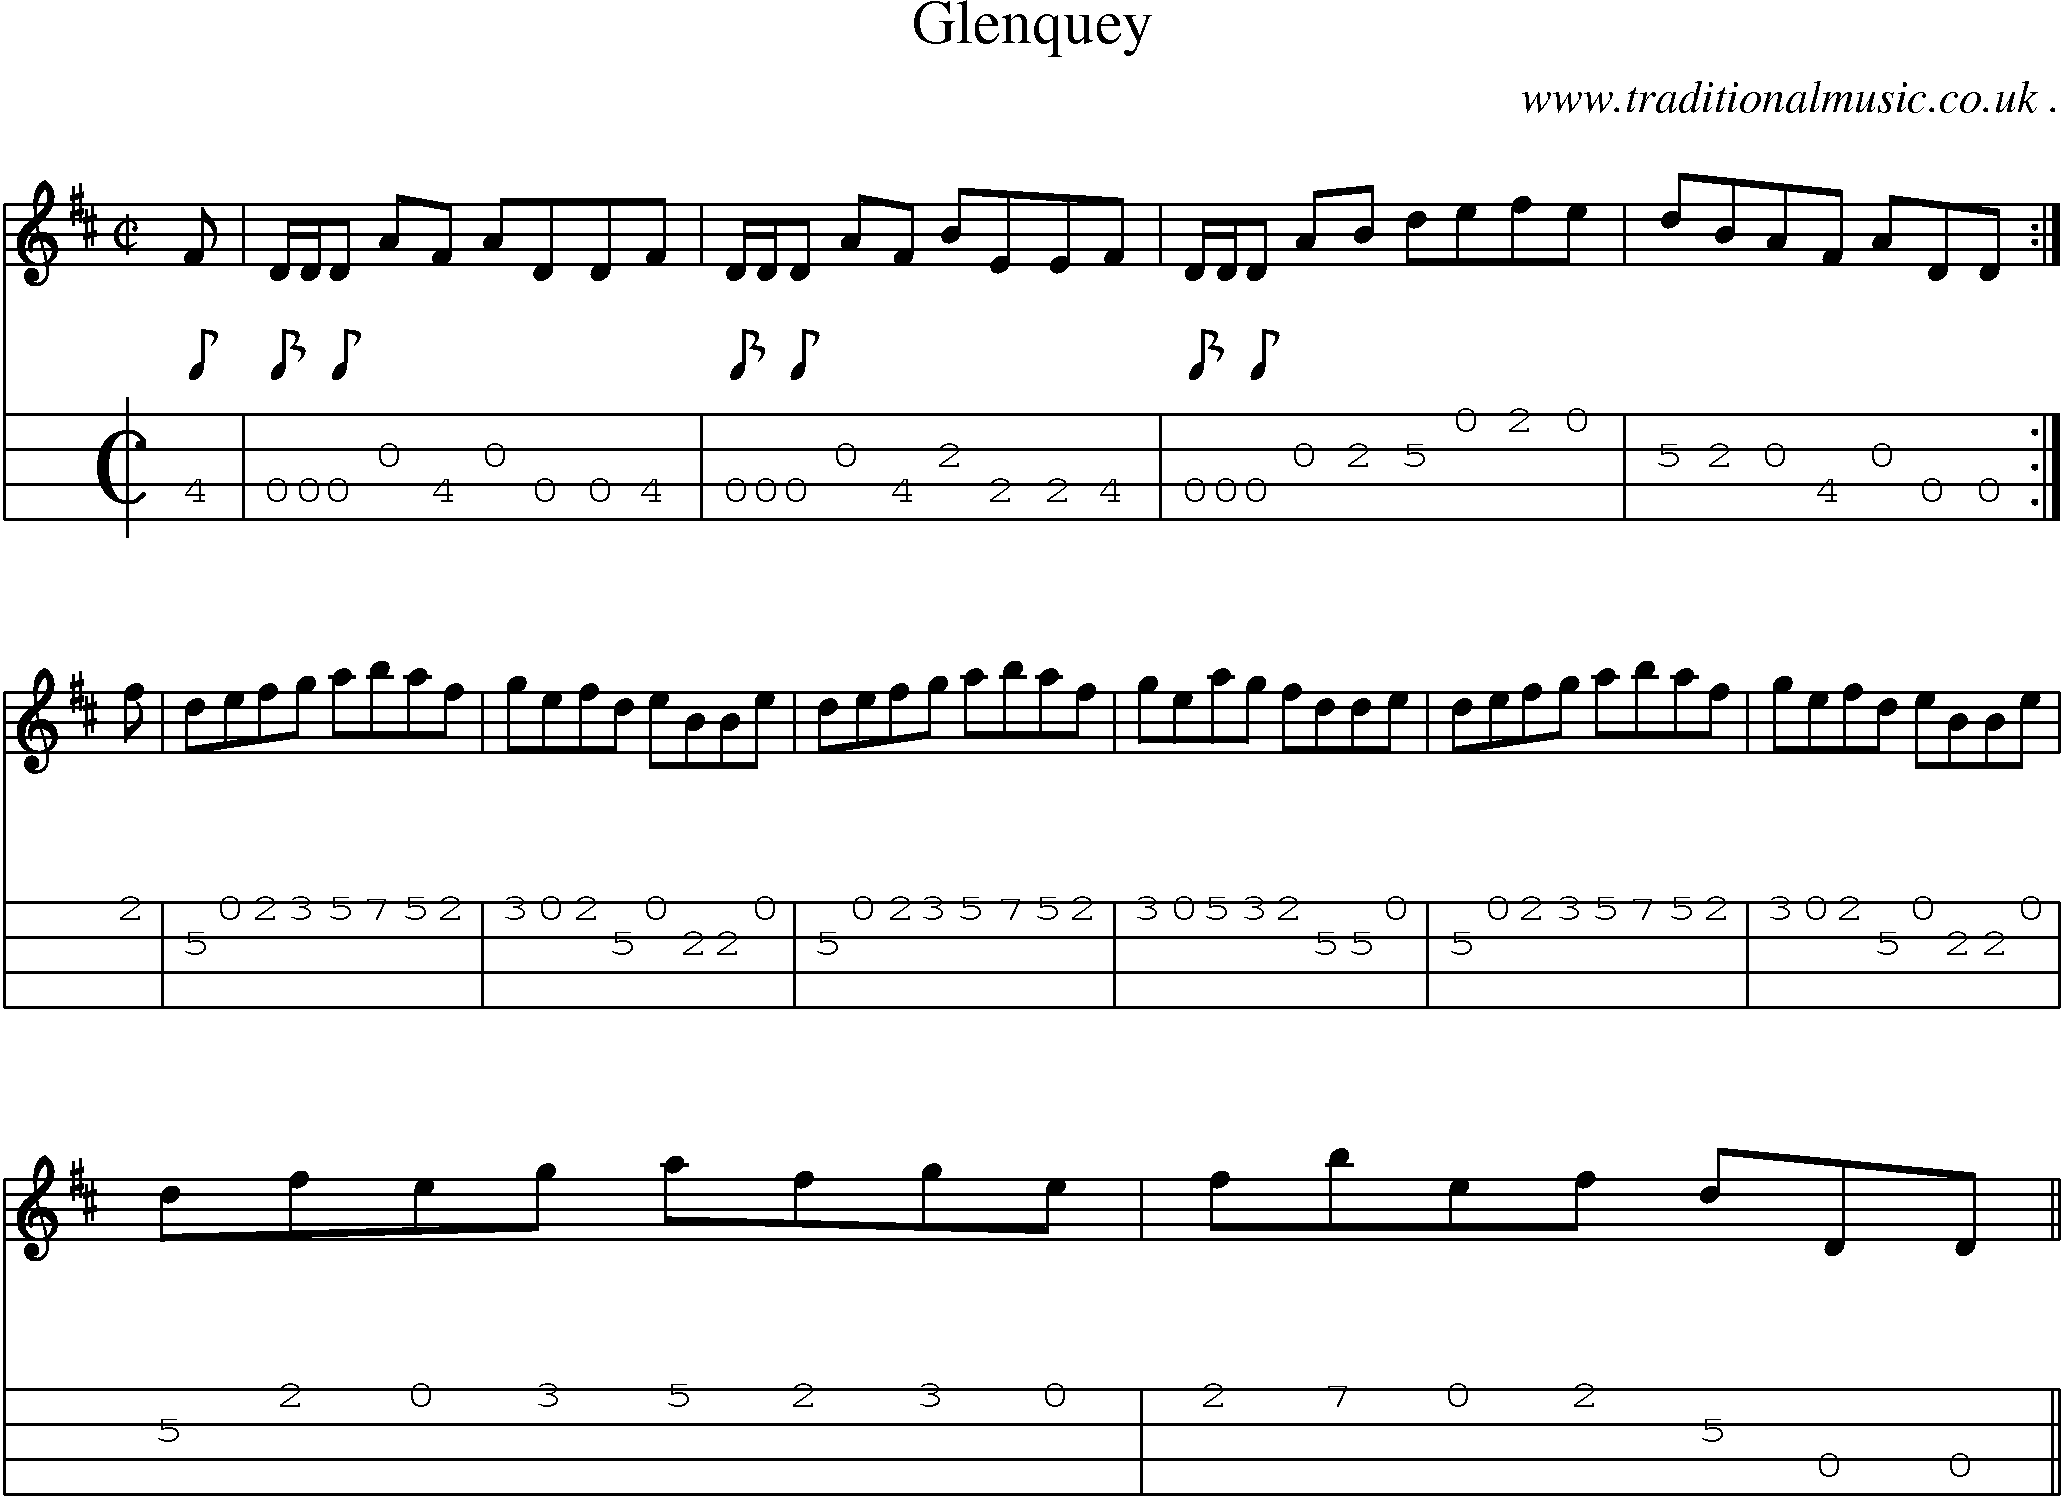 Sheet-music  score, Chords and Mandolin Tabs for Glenquey